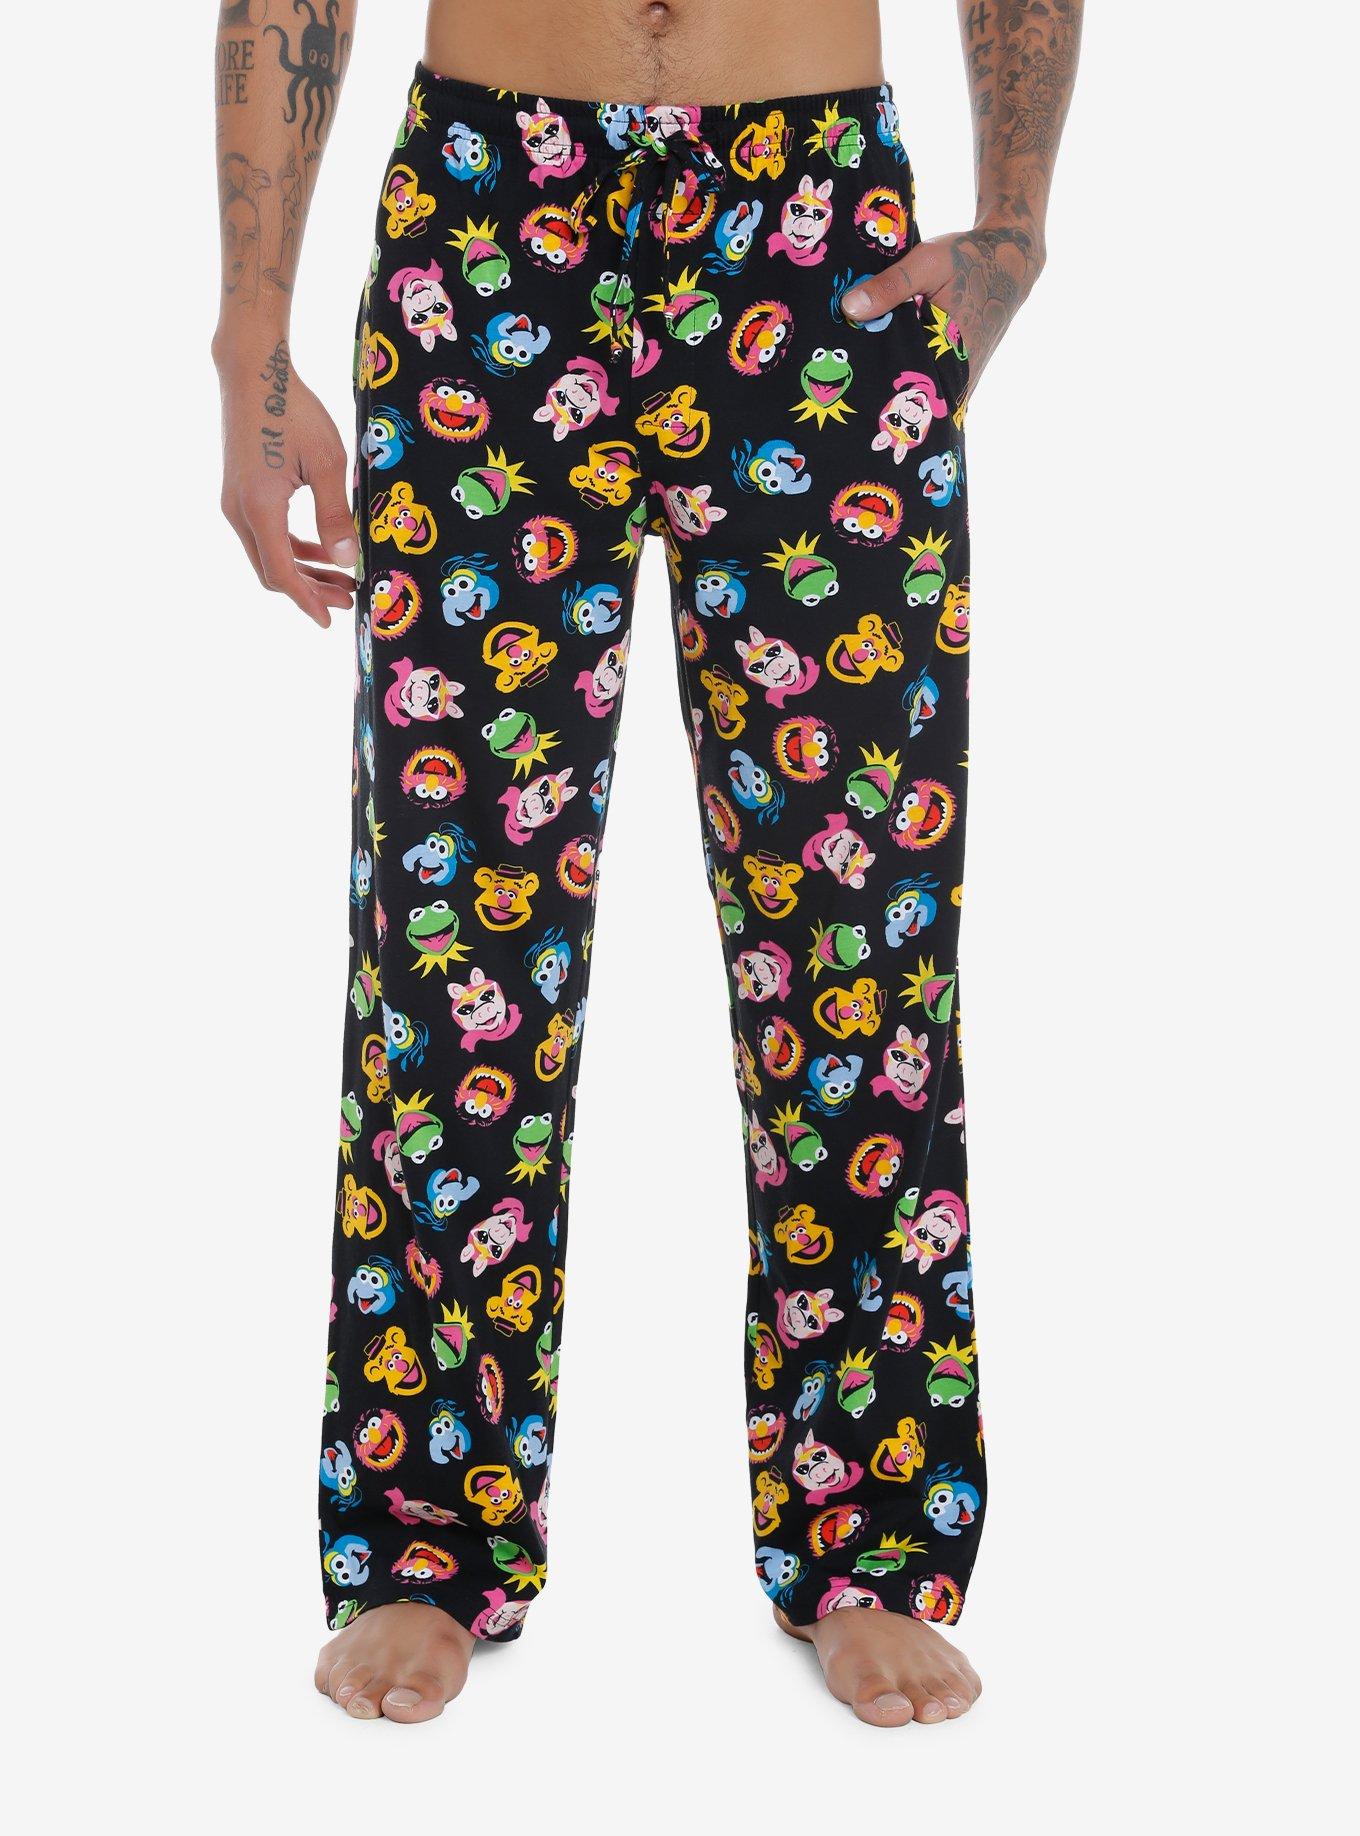 The Muppets Characters Pajama Pants | Hot Topic